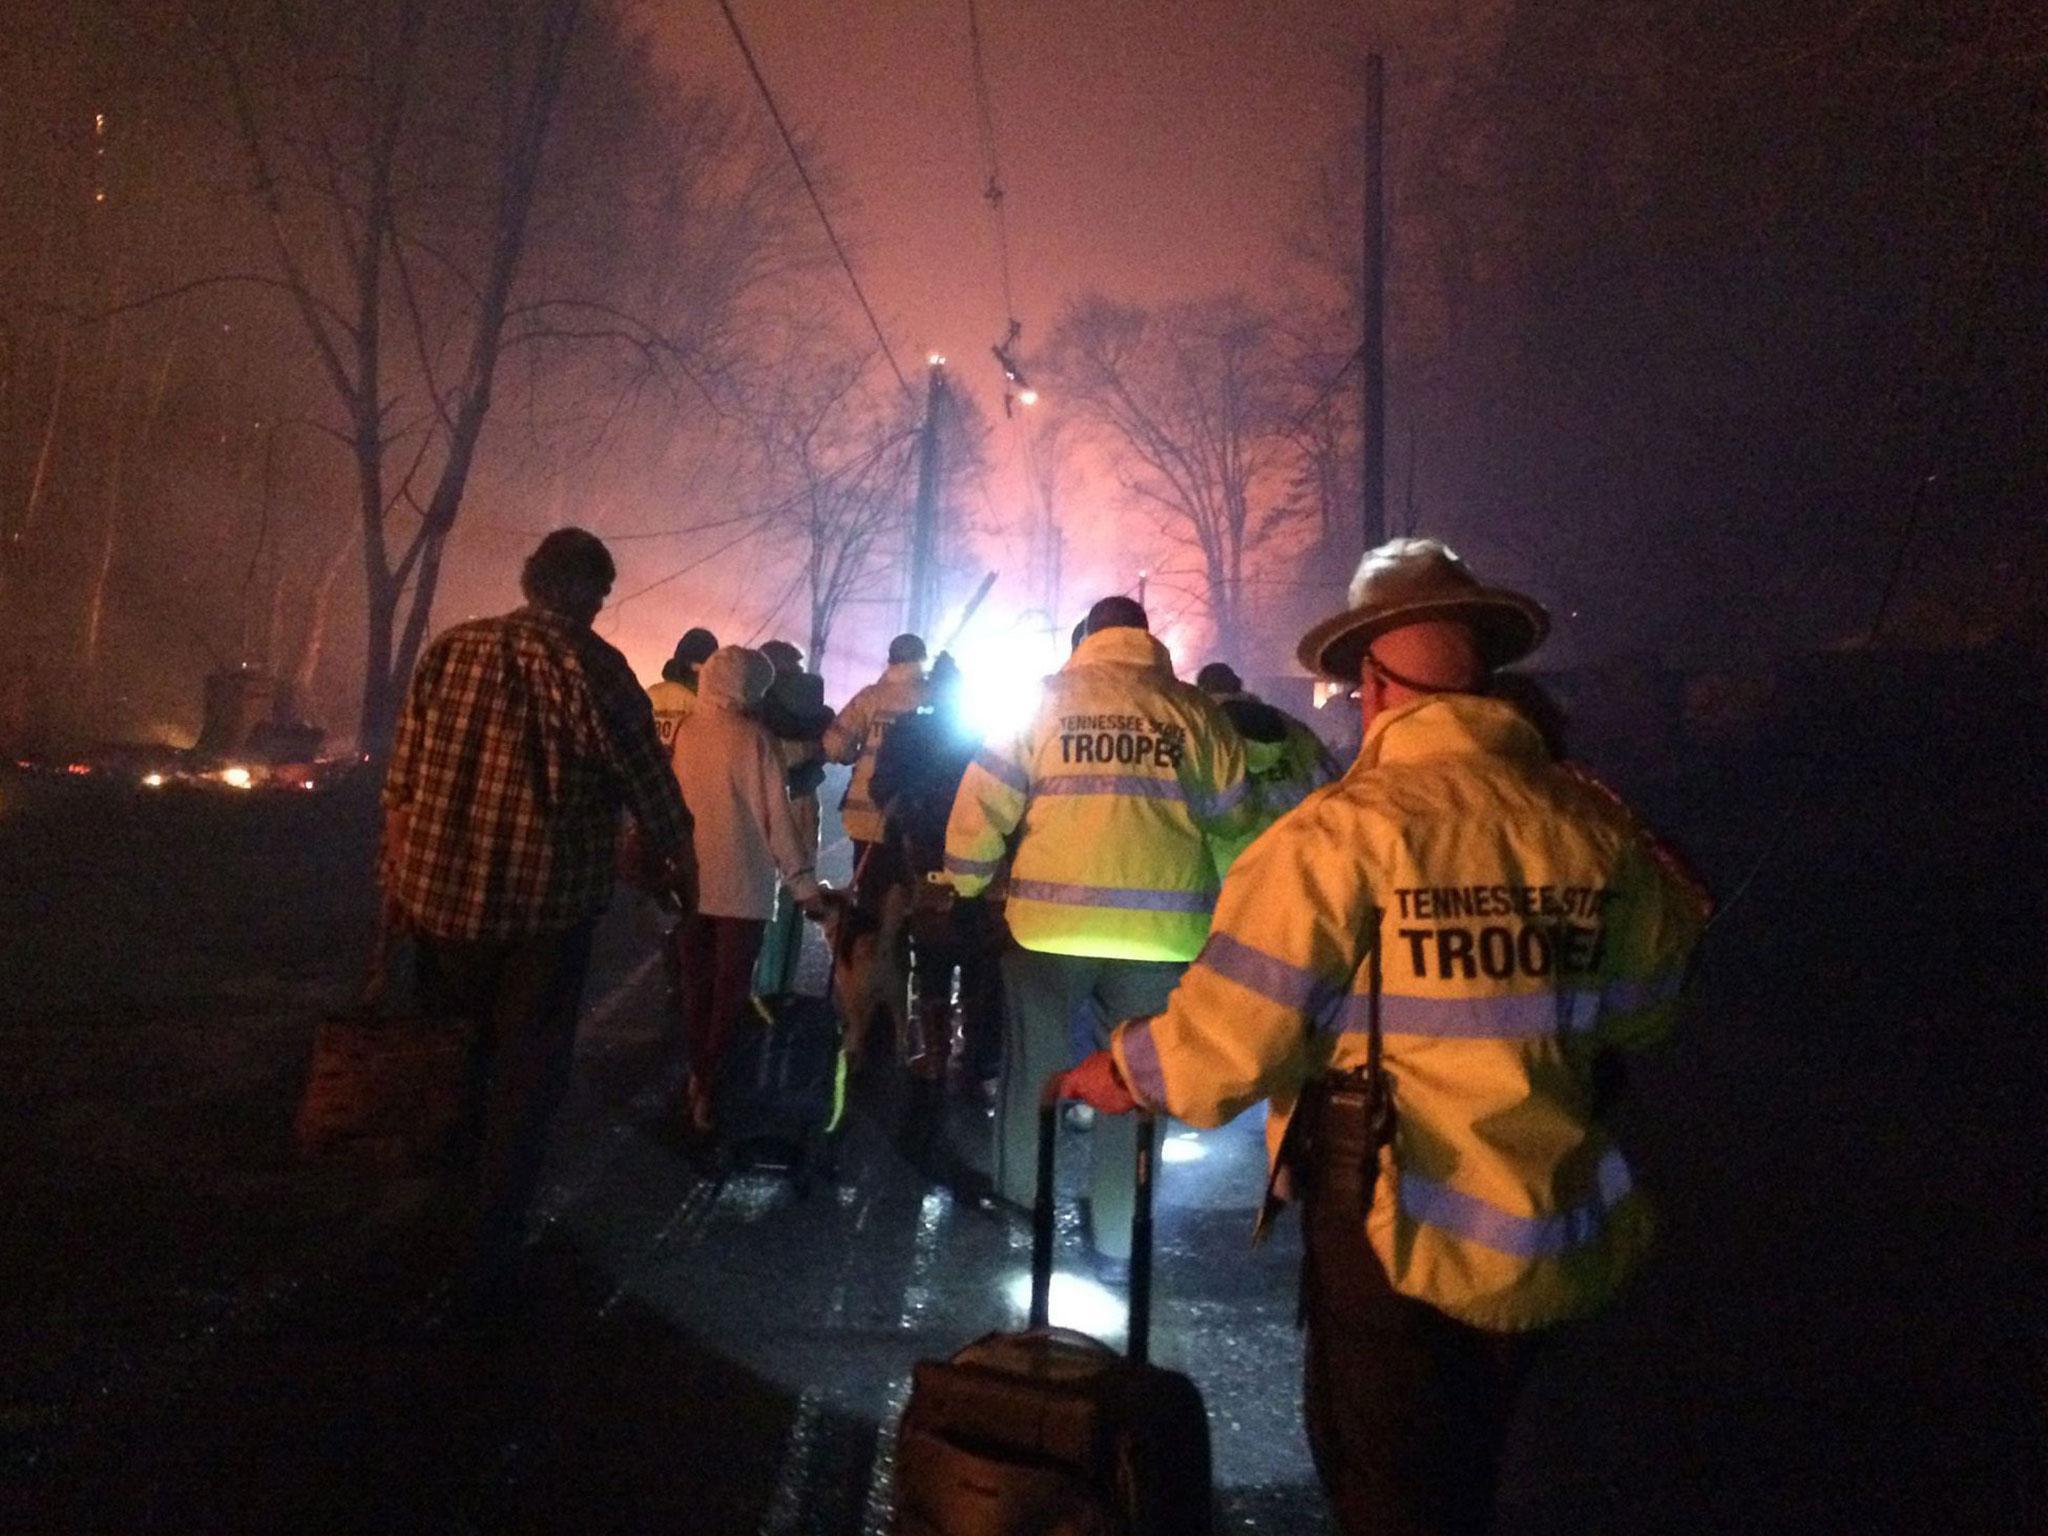 Tennessee State Troopers helping residents evacuate areas threatened by wildfires